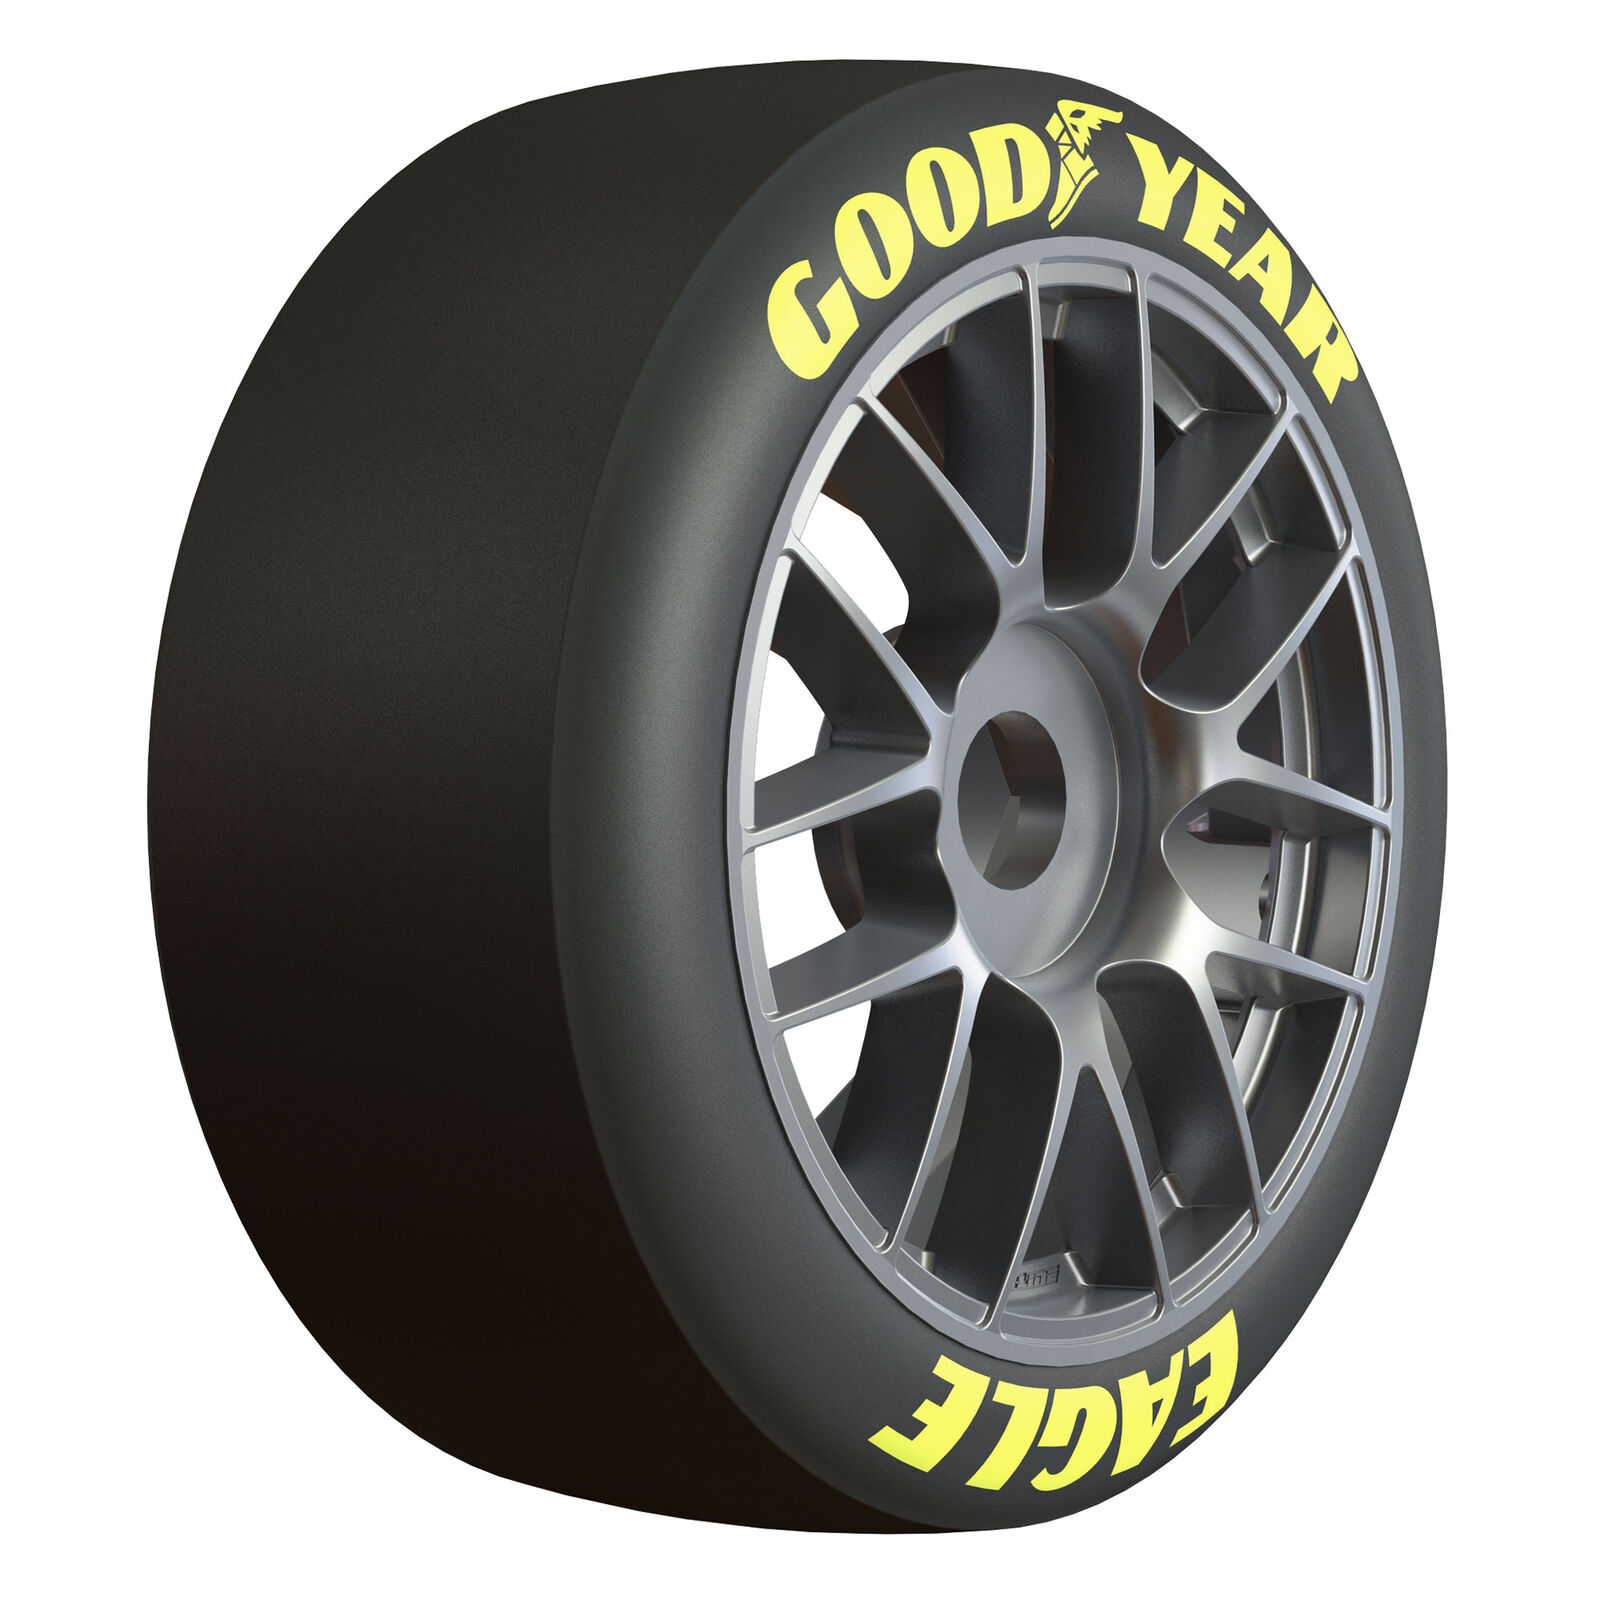 Pro-Line 1/7 Goodyear NASCAR Cup & Truck Racing Tires